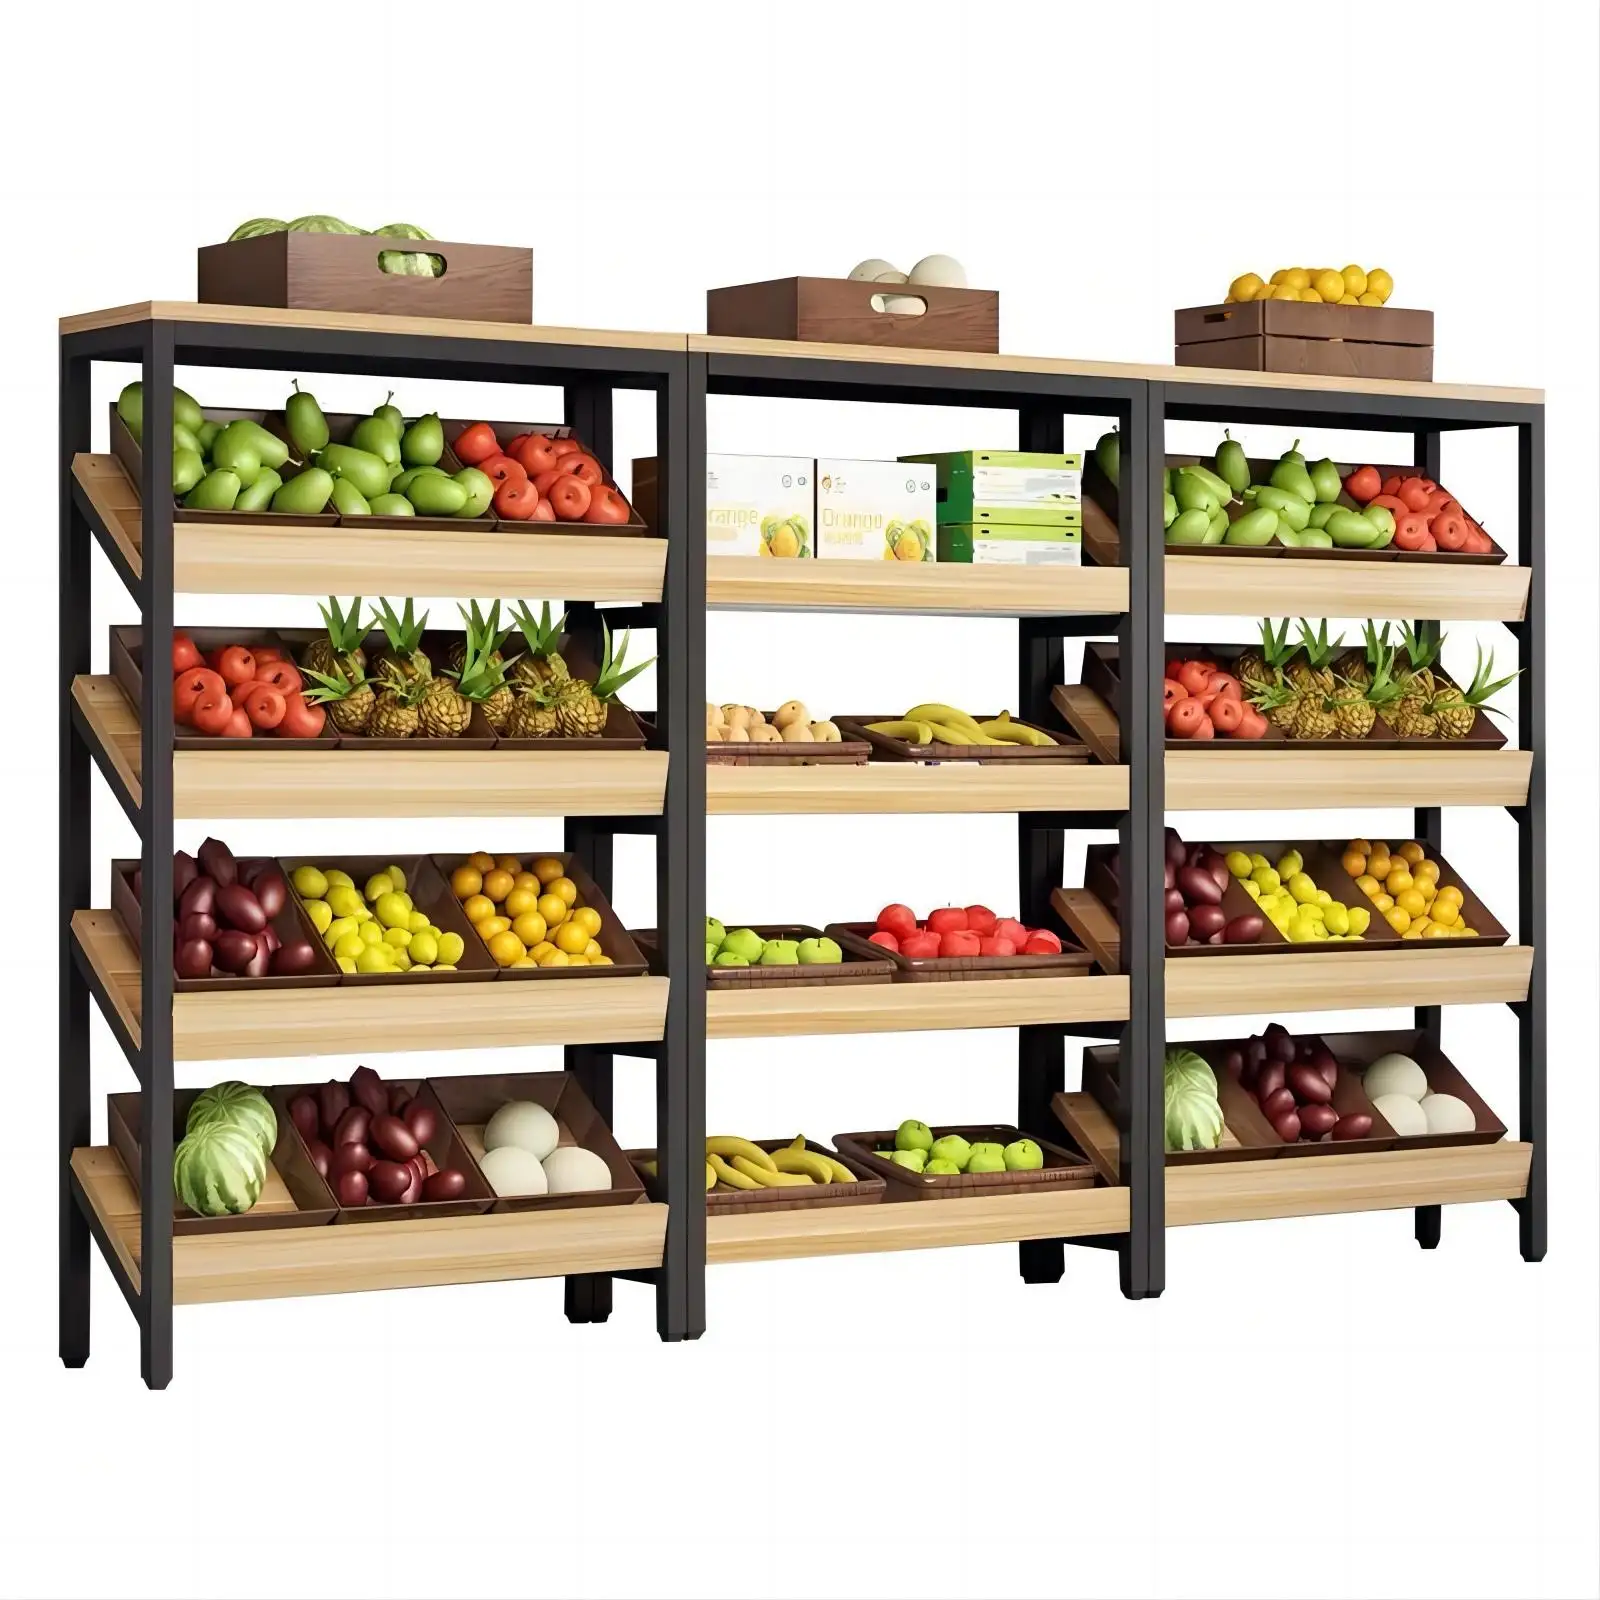 Supermarket Display Stand Display Stand For Supermarket Miniso Stand Shelves Can Storage Shelves Multifunctional Display Rack